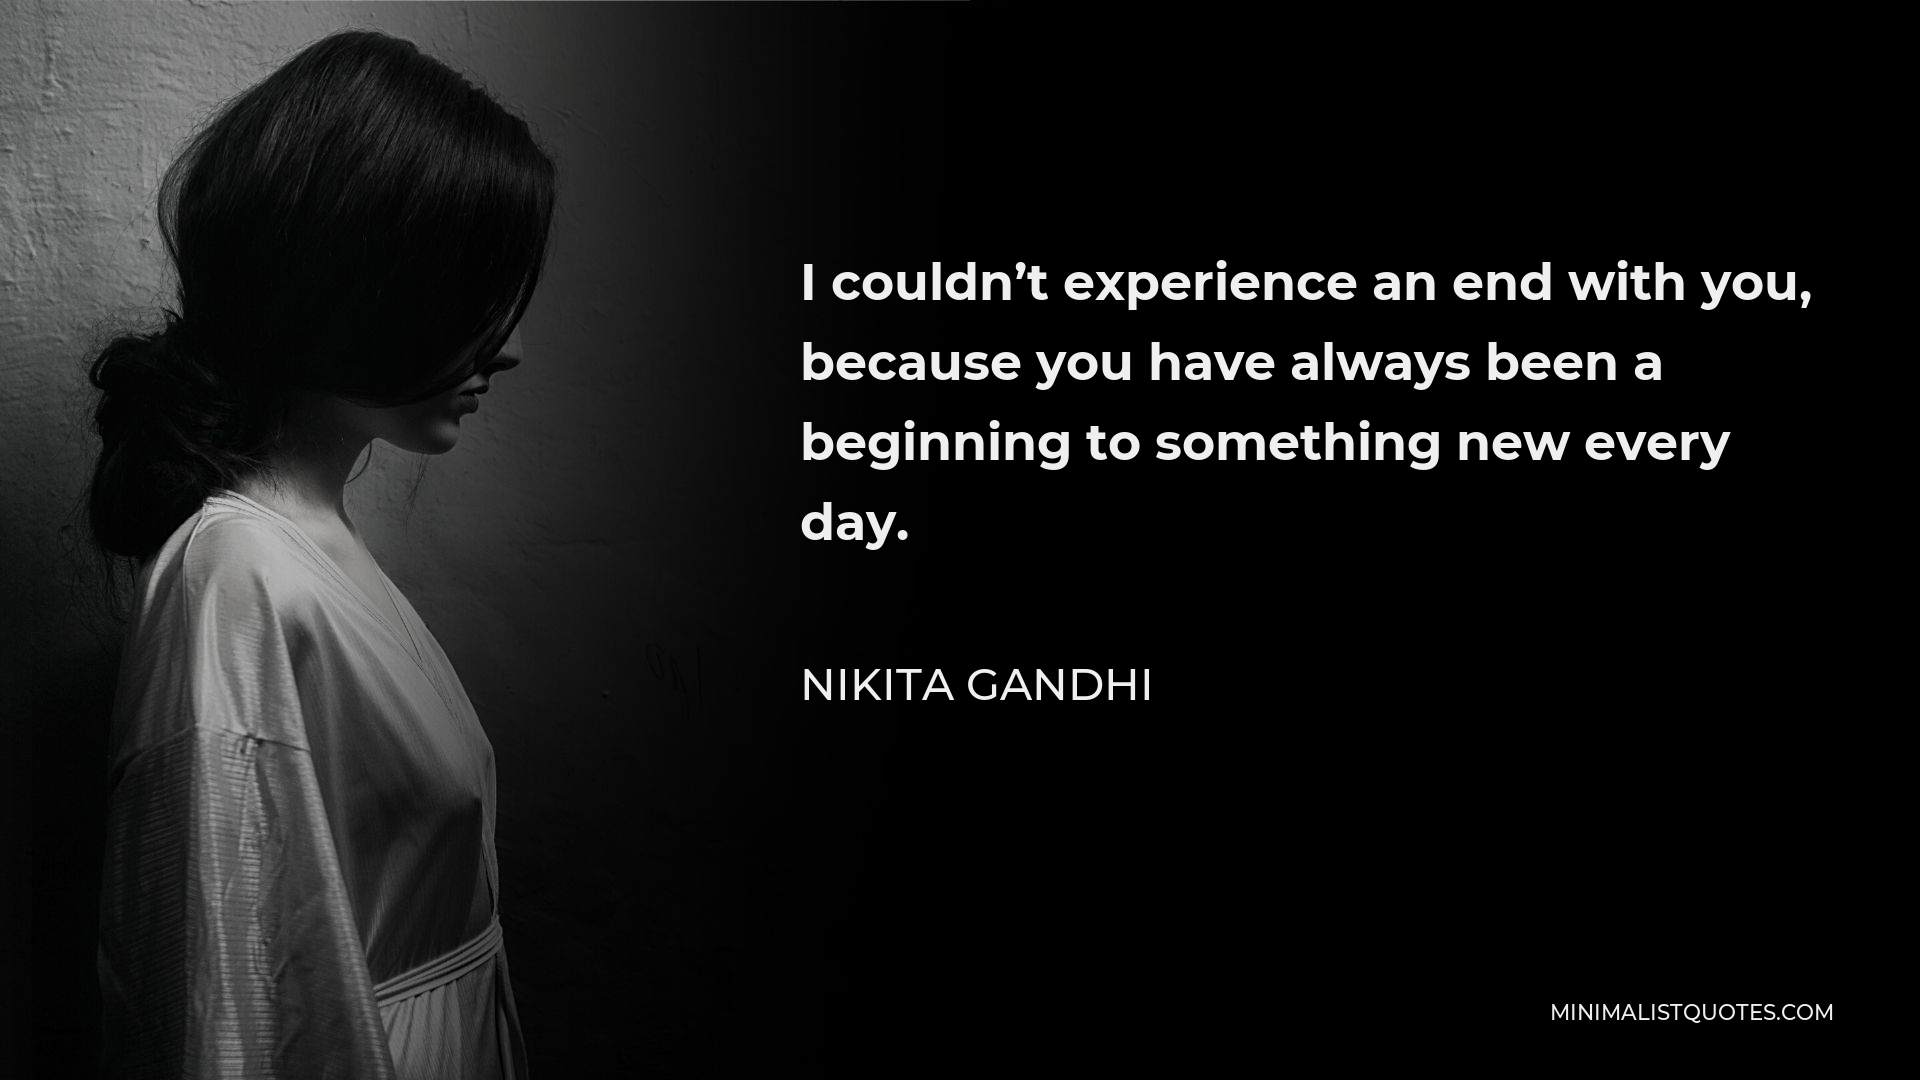 Nikita Gandhi Quote - I couldn’t experience an end with you, because you have always been a beginning to something new every day.